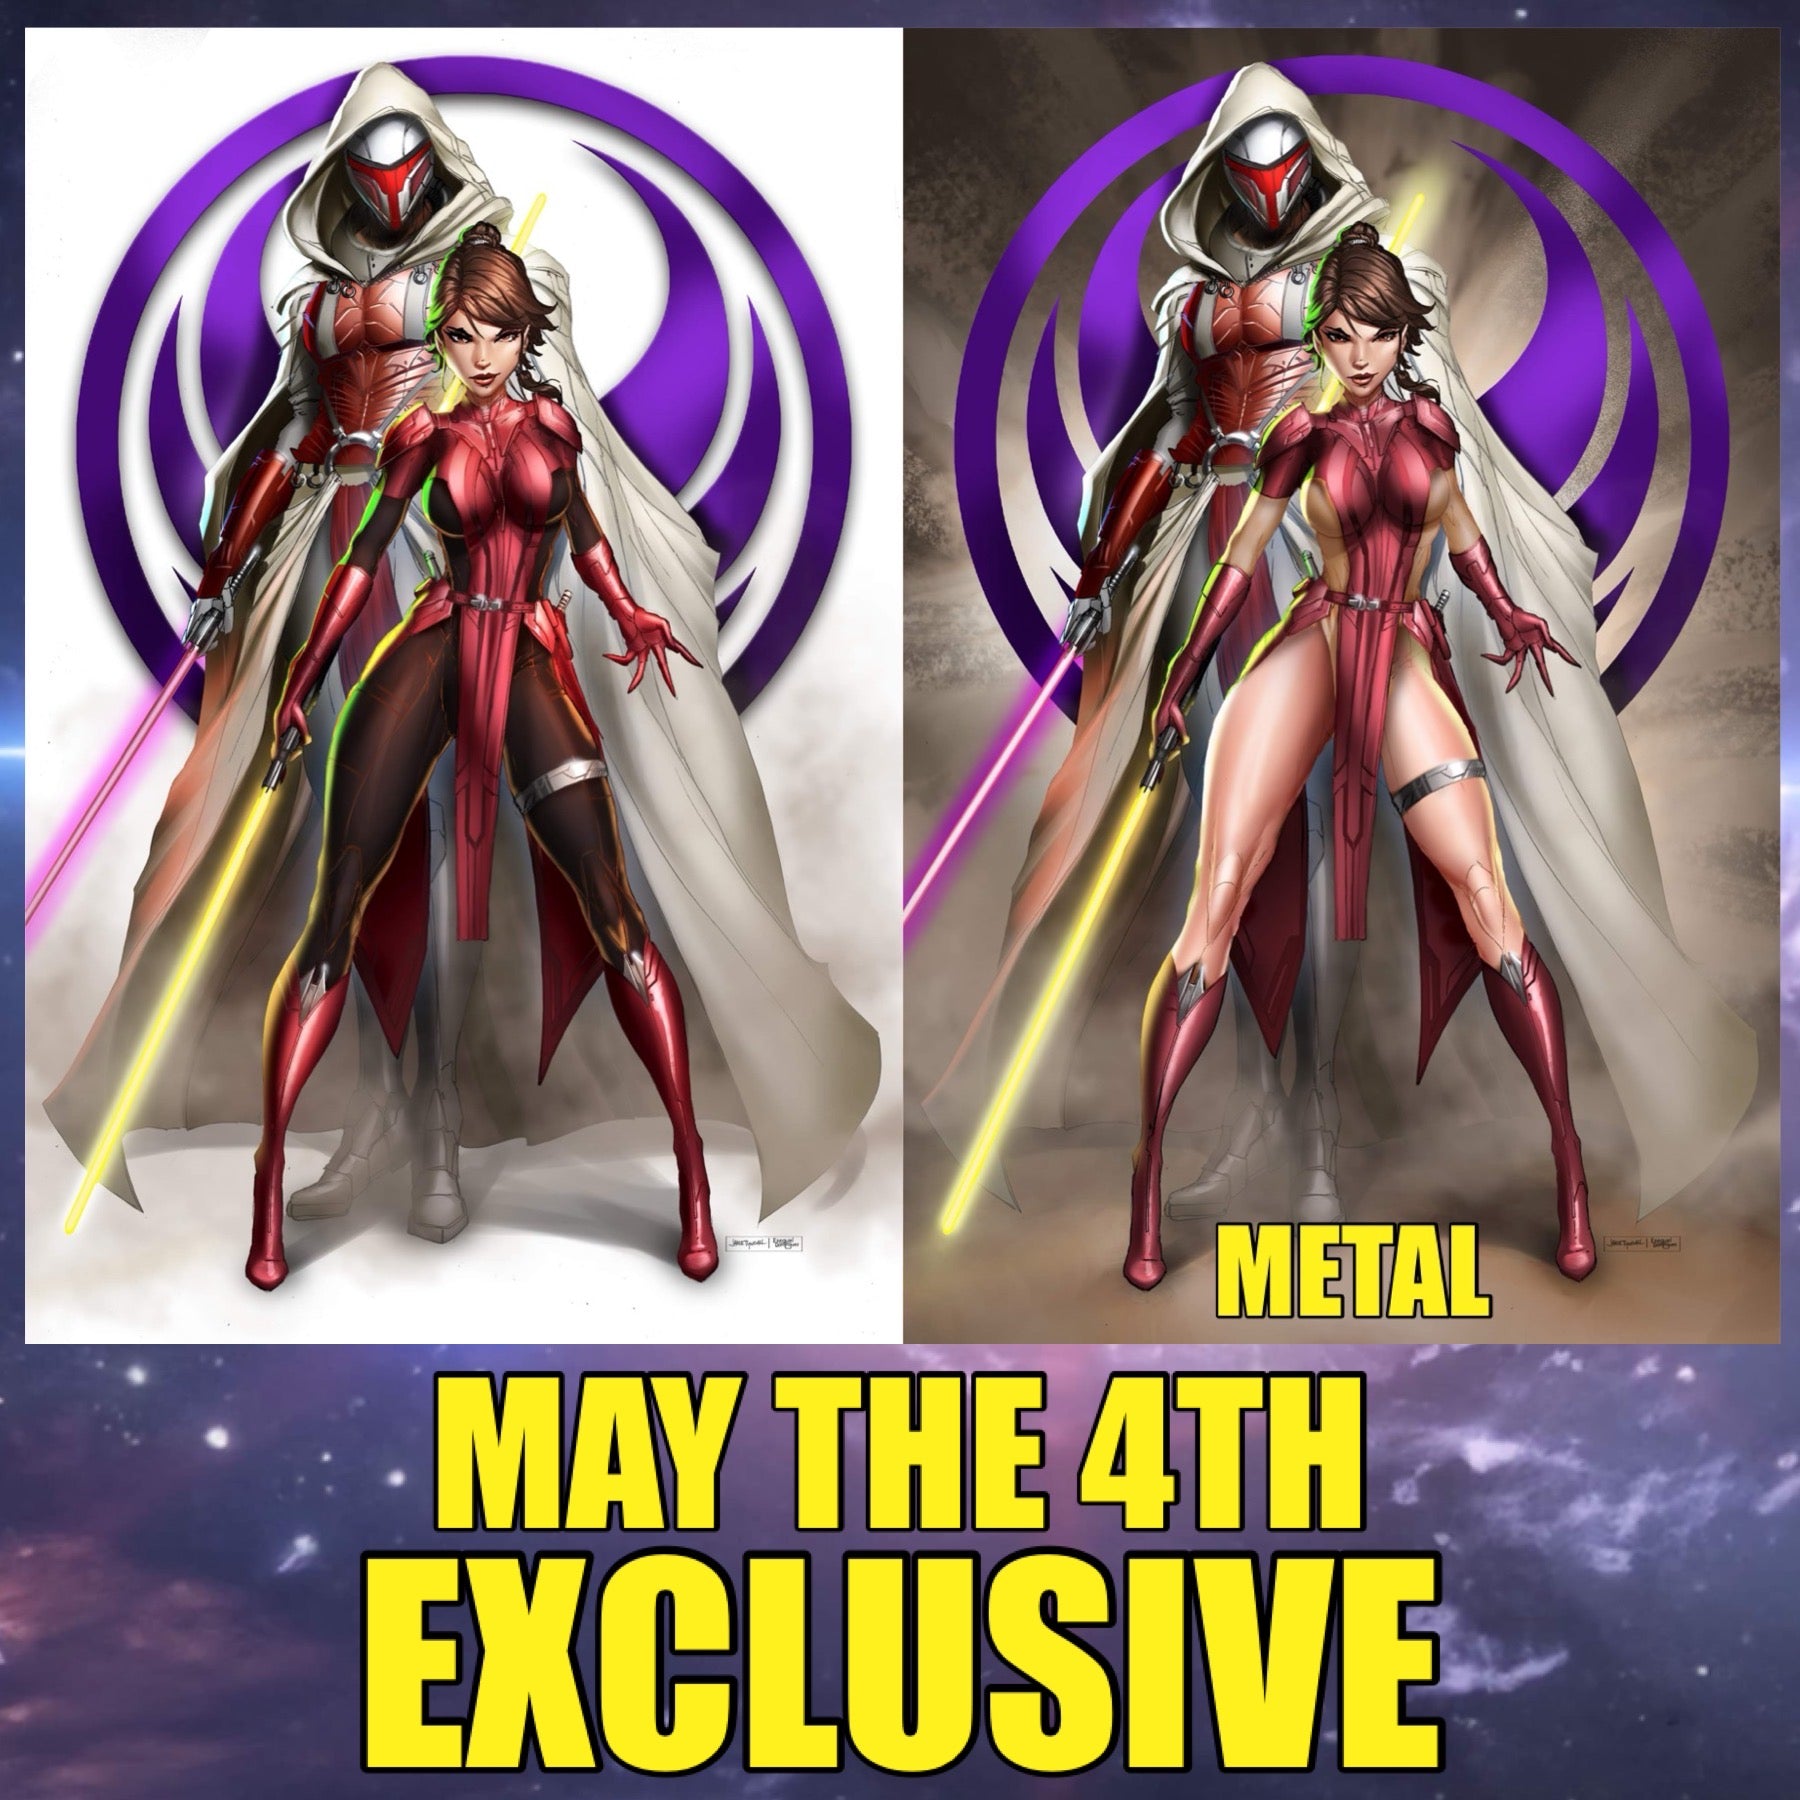 DAUGHTER'S OF EDEN #1 JAMIE TYNDALL MAY THE 4TH JEDI REVAN EXCLUSIVE VARIANT OPTIONS